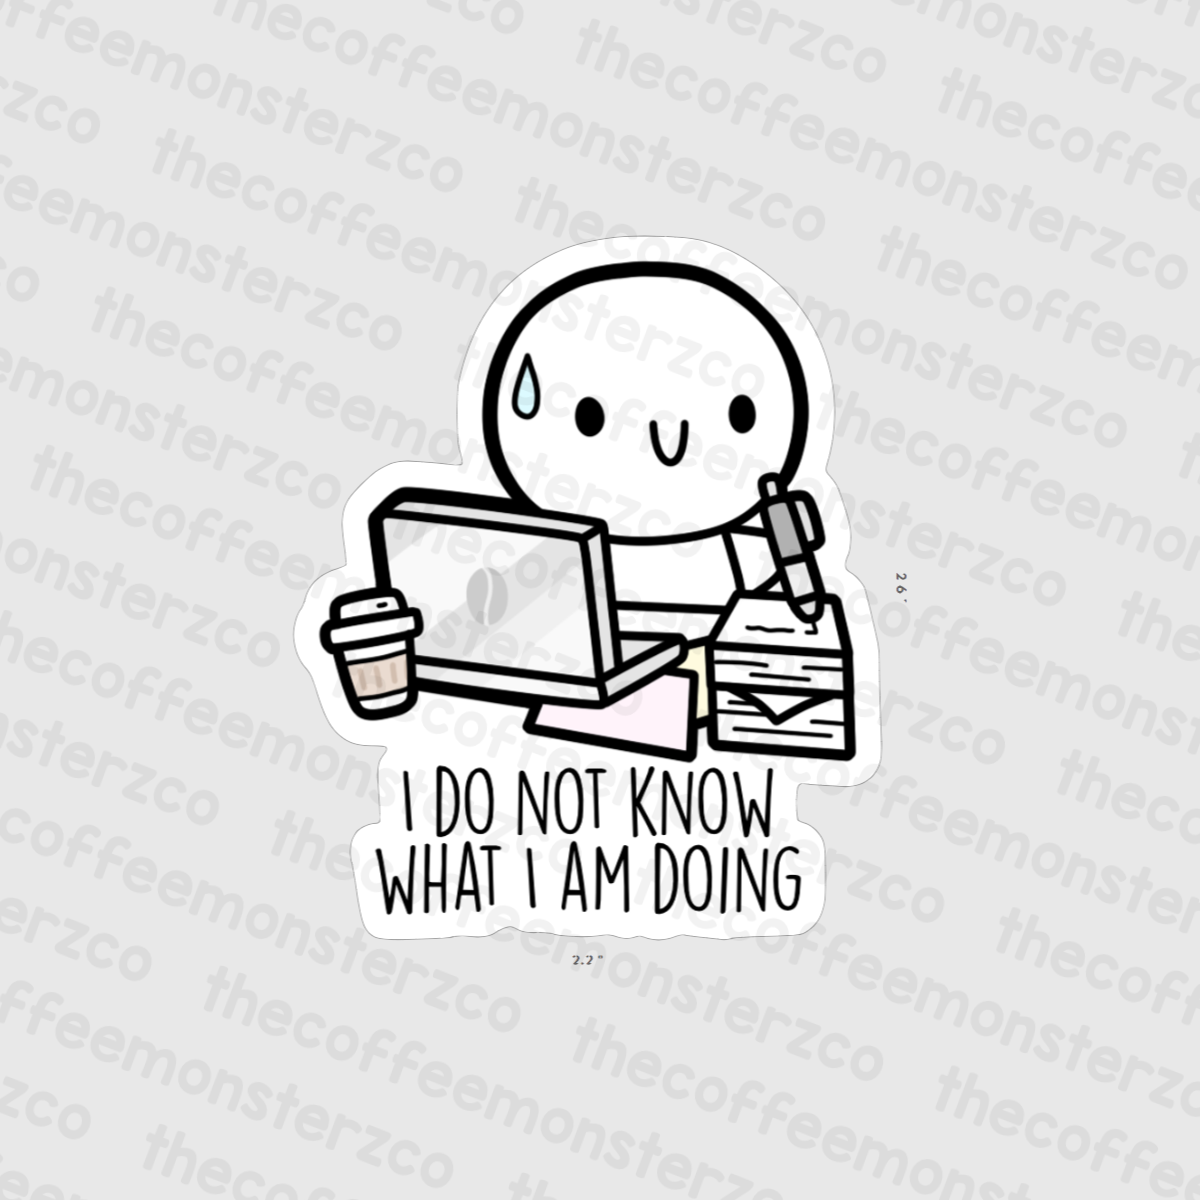 I Do Not Know What I Am Doing - Vinyl Sticker